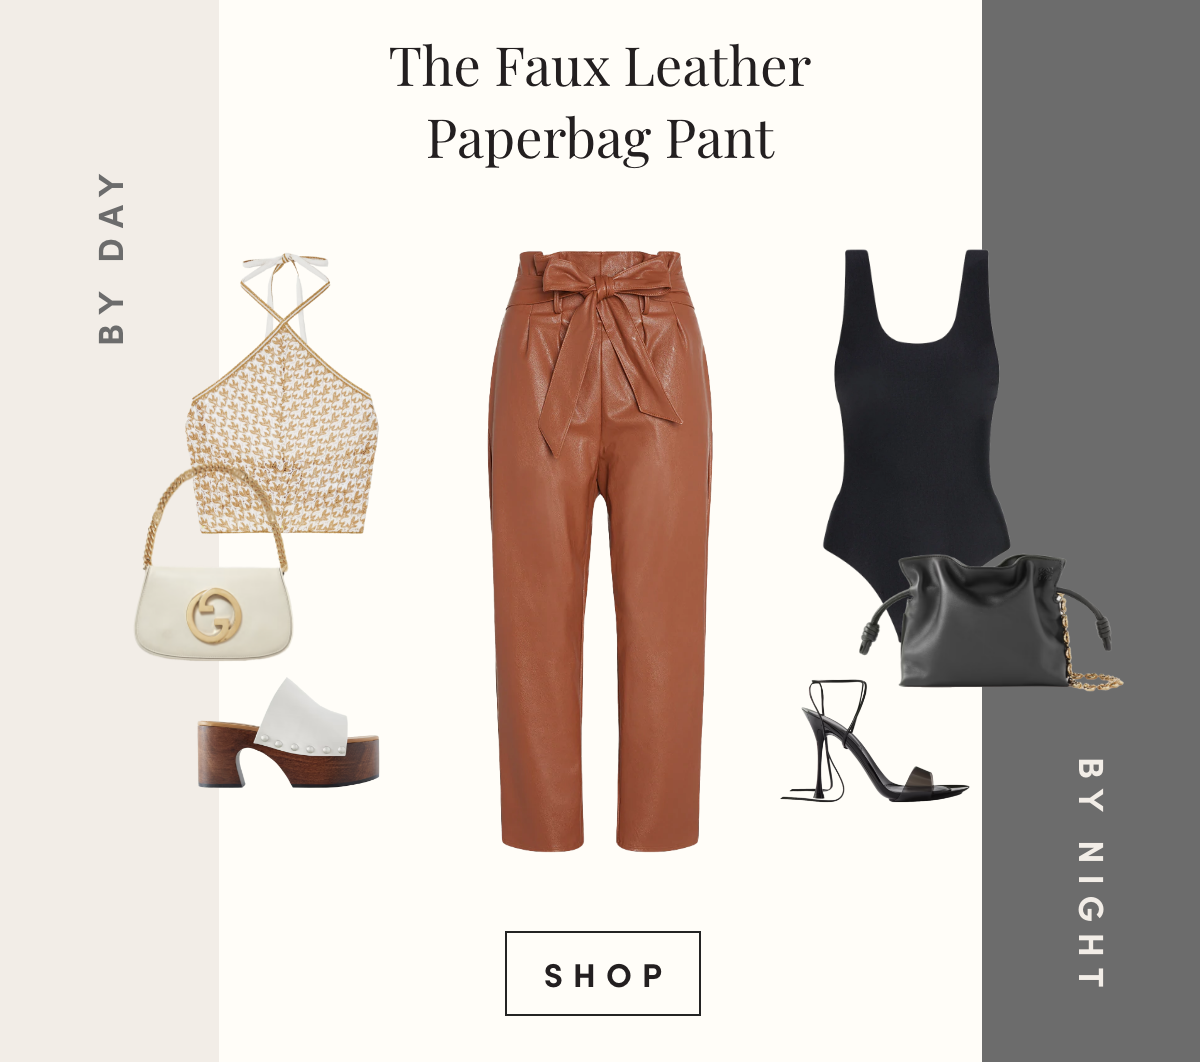 The Faux Leather Paperbag Pant